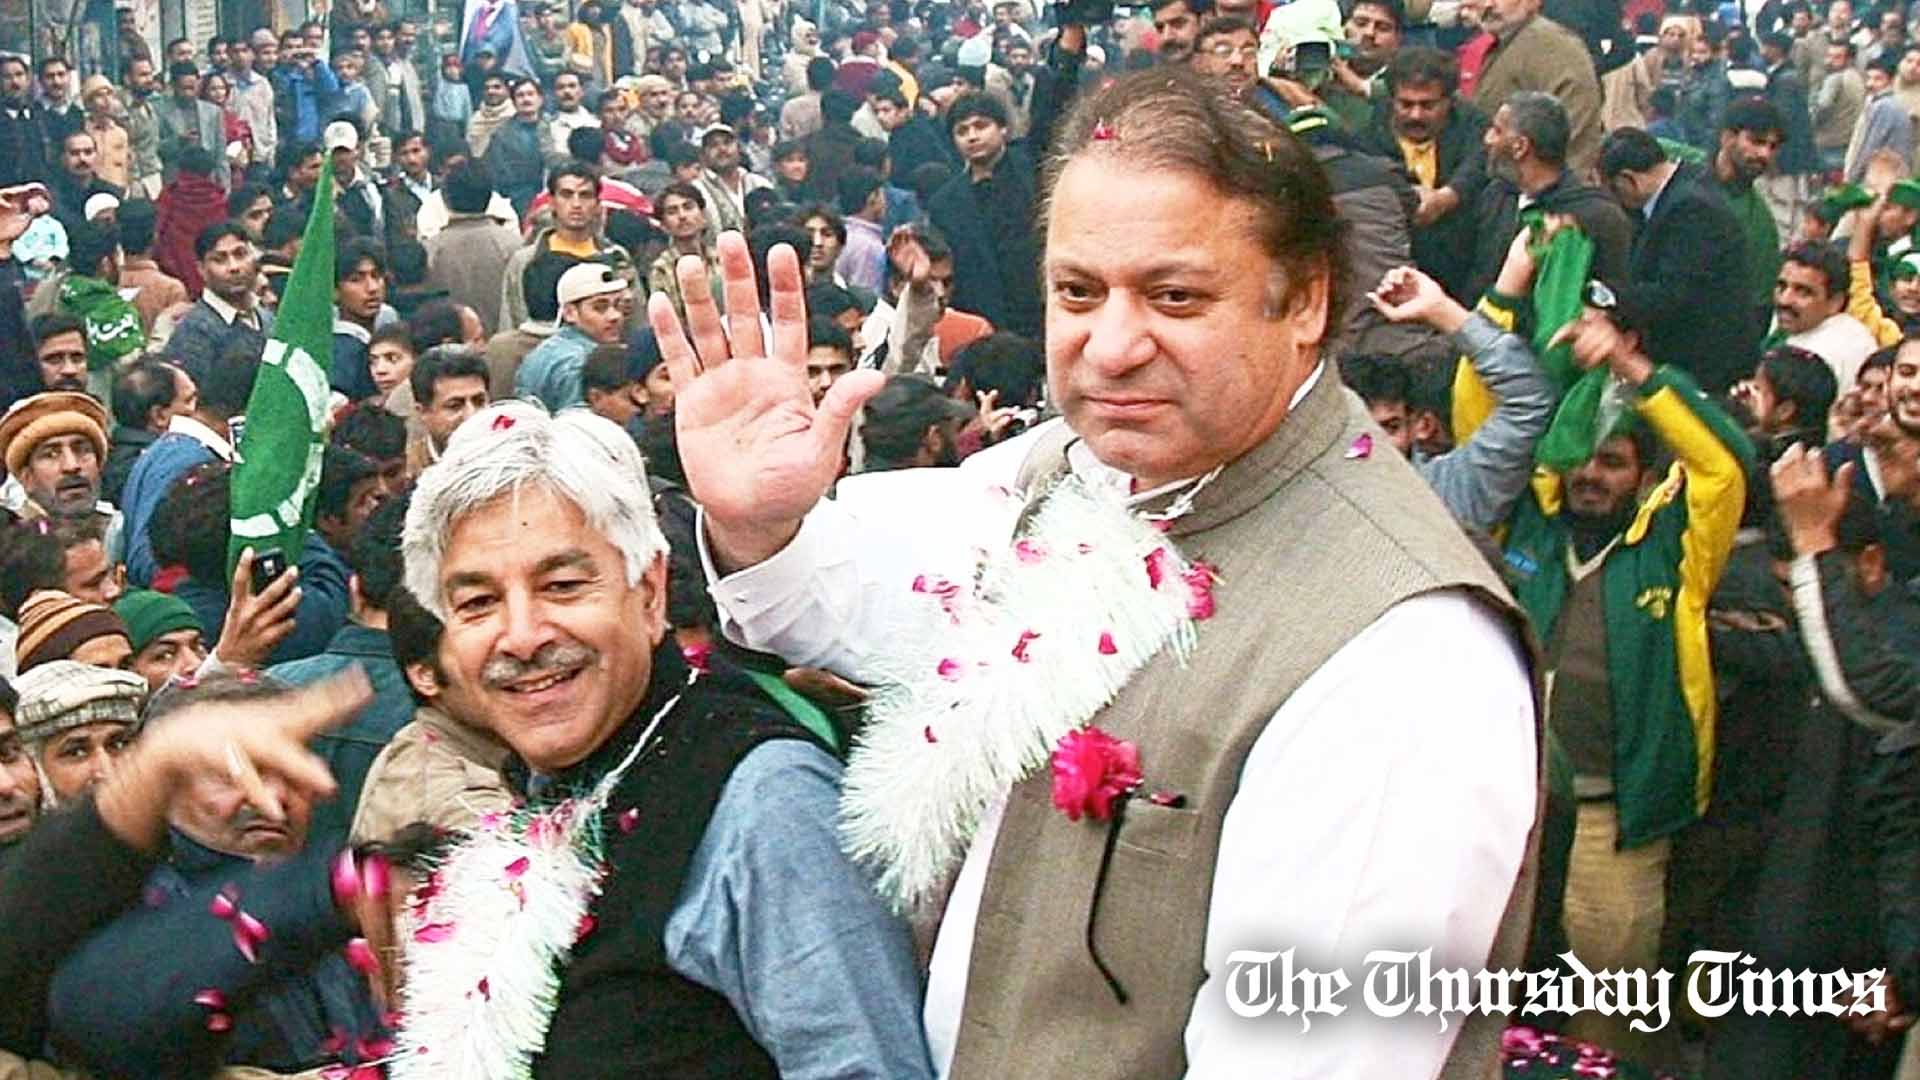 Incumbent Pakistani defence minister Khawaja Asif (L) and former prime minister Nawaz Sharif (R) are shown at Sialkot in 2007. — FILE/THE THURSDAY TIMES